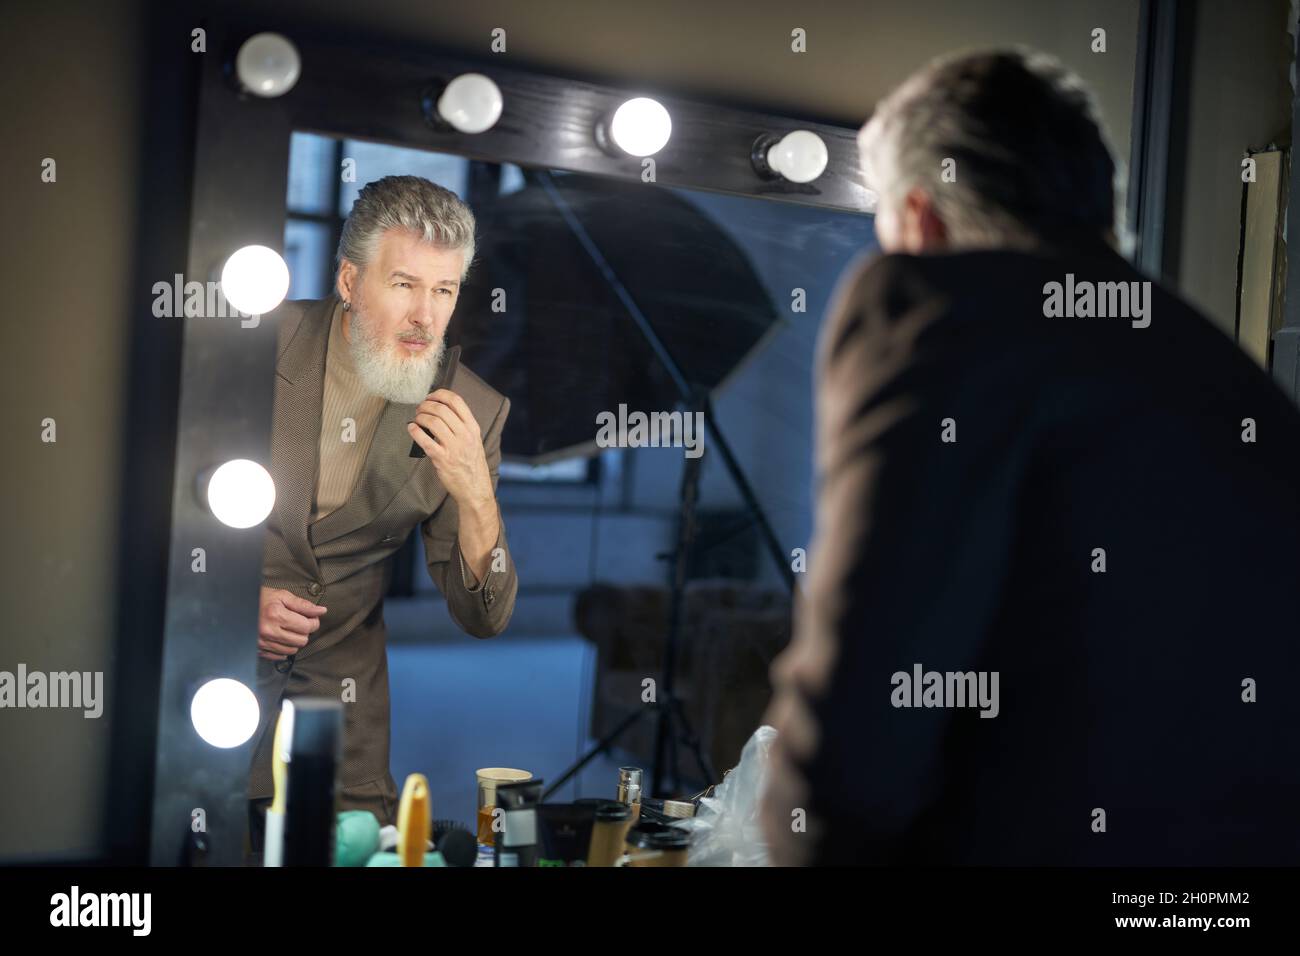 Handsome gray haired middle aged man wearing elegant suit looking at himself in the mirror while preparing for studio photoshoot Stock Photo